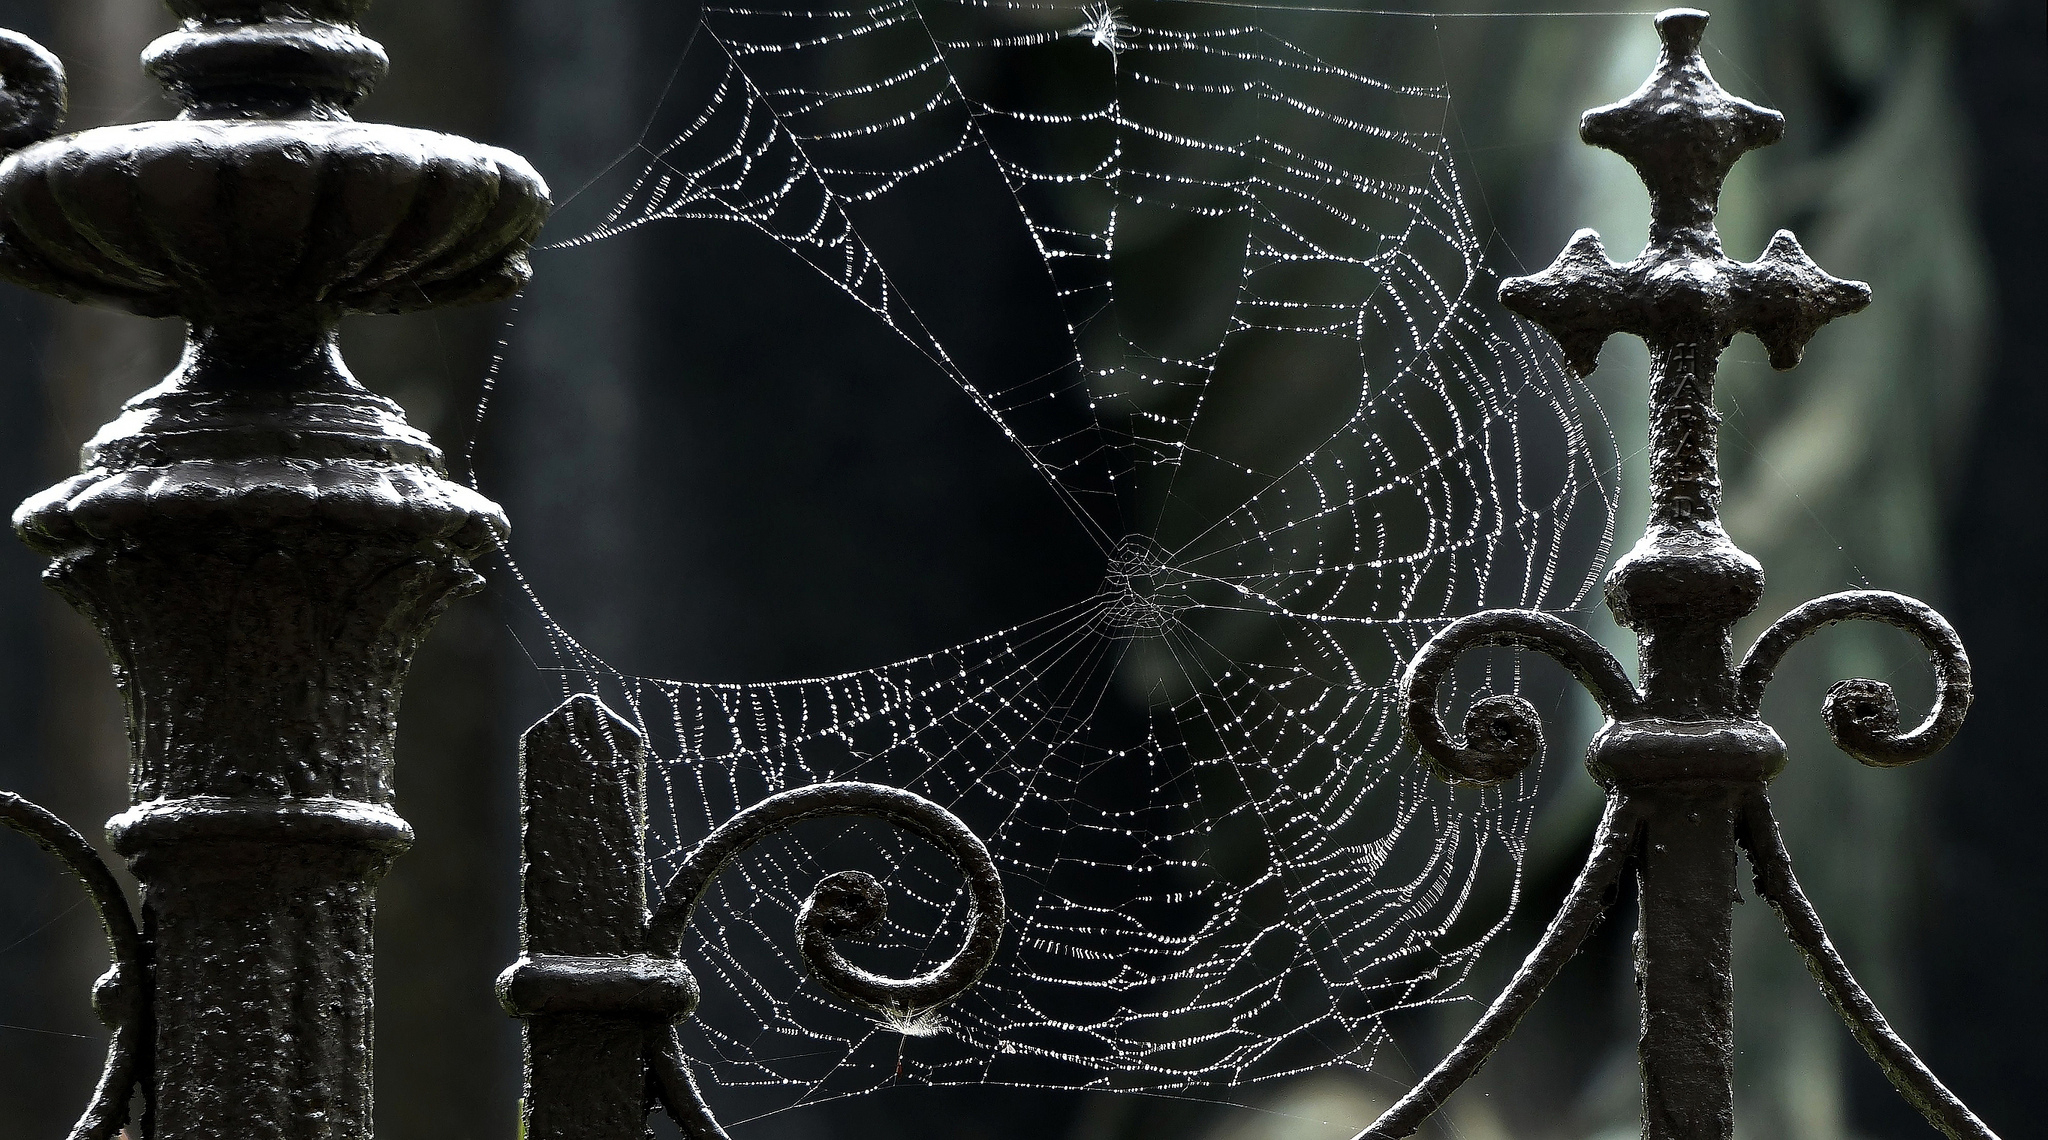 2048x1140 Free download The Day it Rained Spiders CryBytes [] for your Desktop, Mobile \u0026 Tablet | Explore 73+ Spider Web Wallpaper | HD Spider Wallpaper, Spider Web Wallpaper HD, Spider Web Wallpaper for Walls